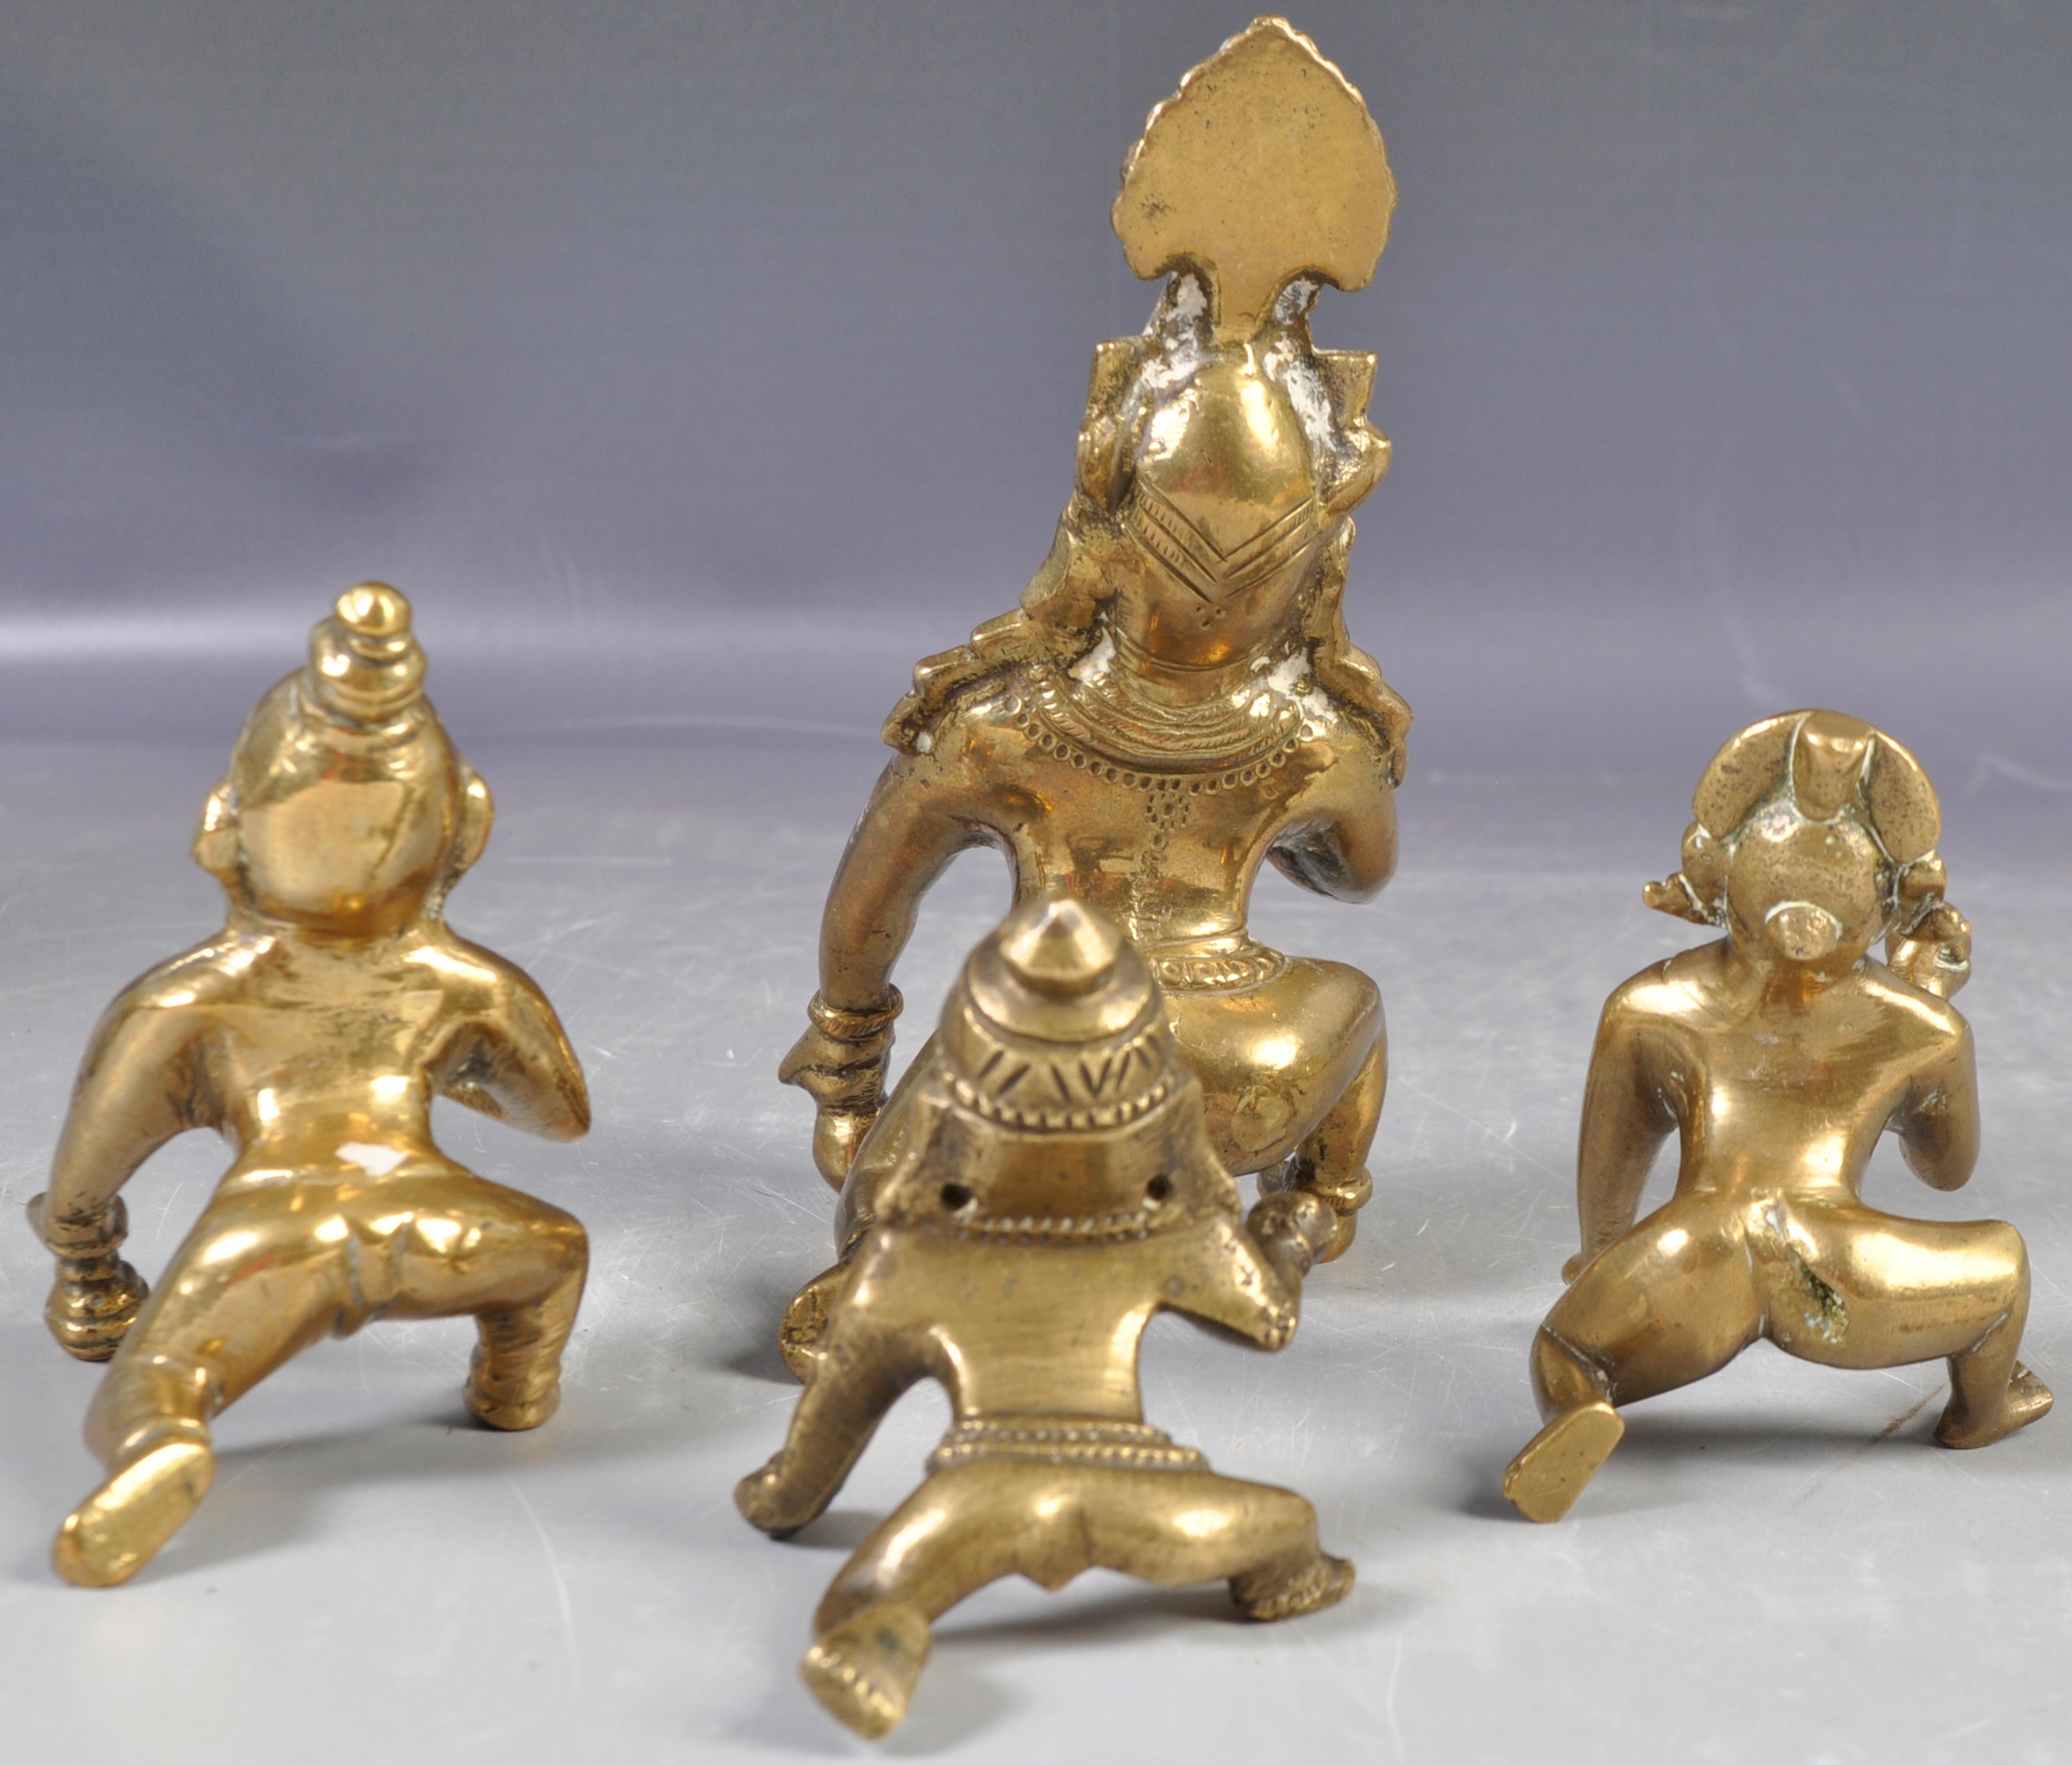 COLLECTION OF ANTIQUE FIGURES OF BOY KRISHNA AND BUTTER BALL - Image 5 of 5